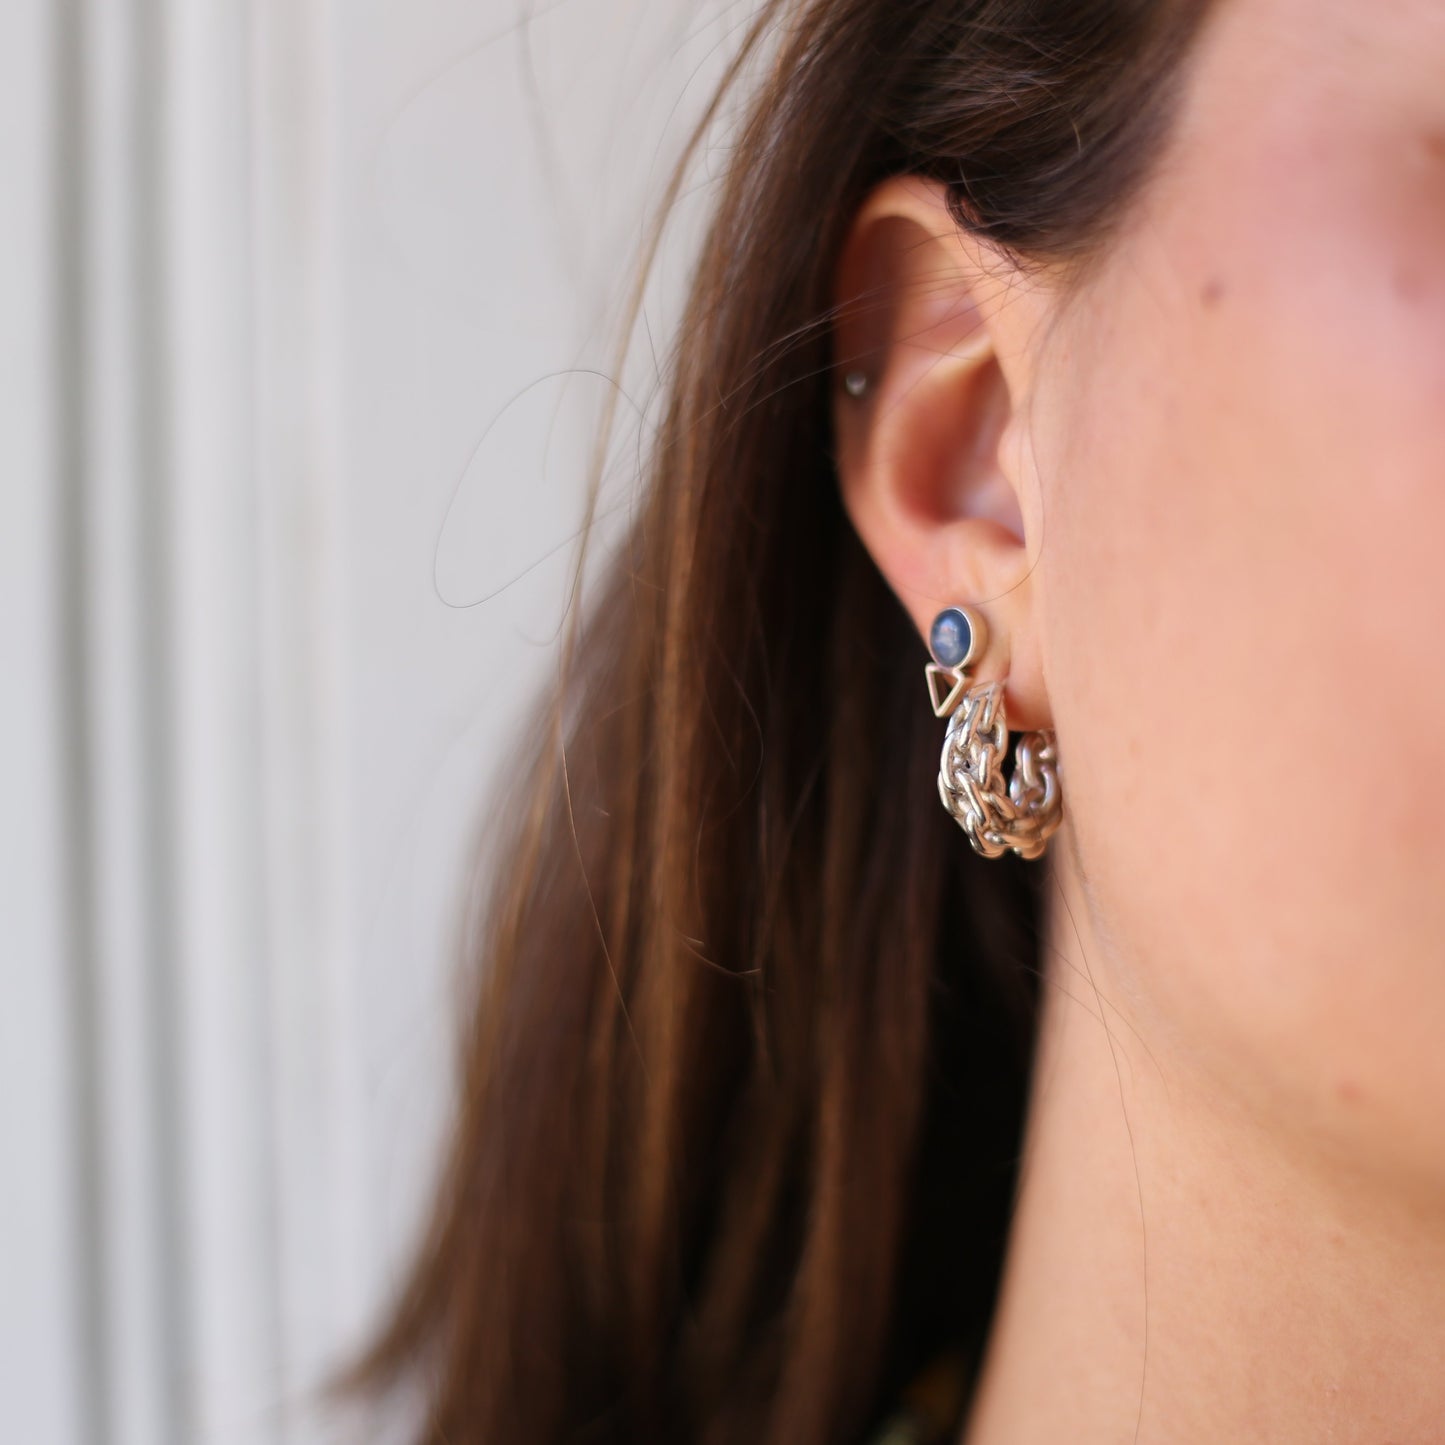 earrings hoops jewelry silver gold handcrafted  90s inspired orecchini argento artgianale gioielli joias brincos prata